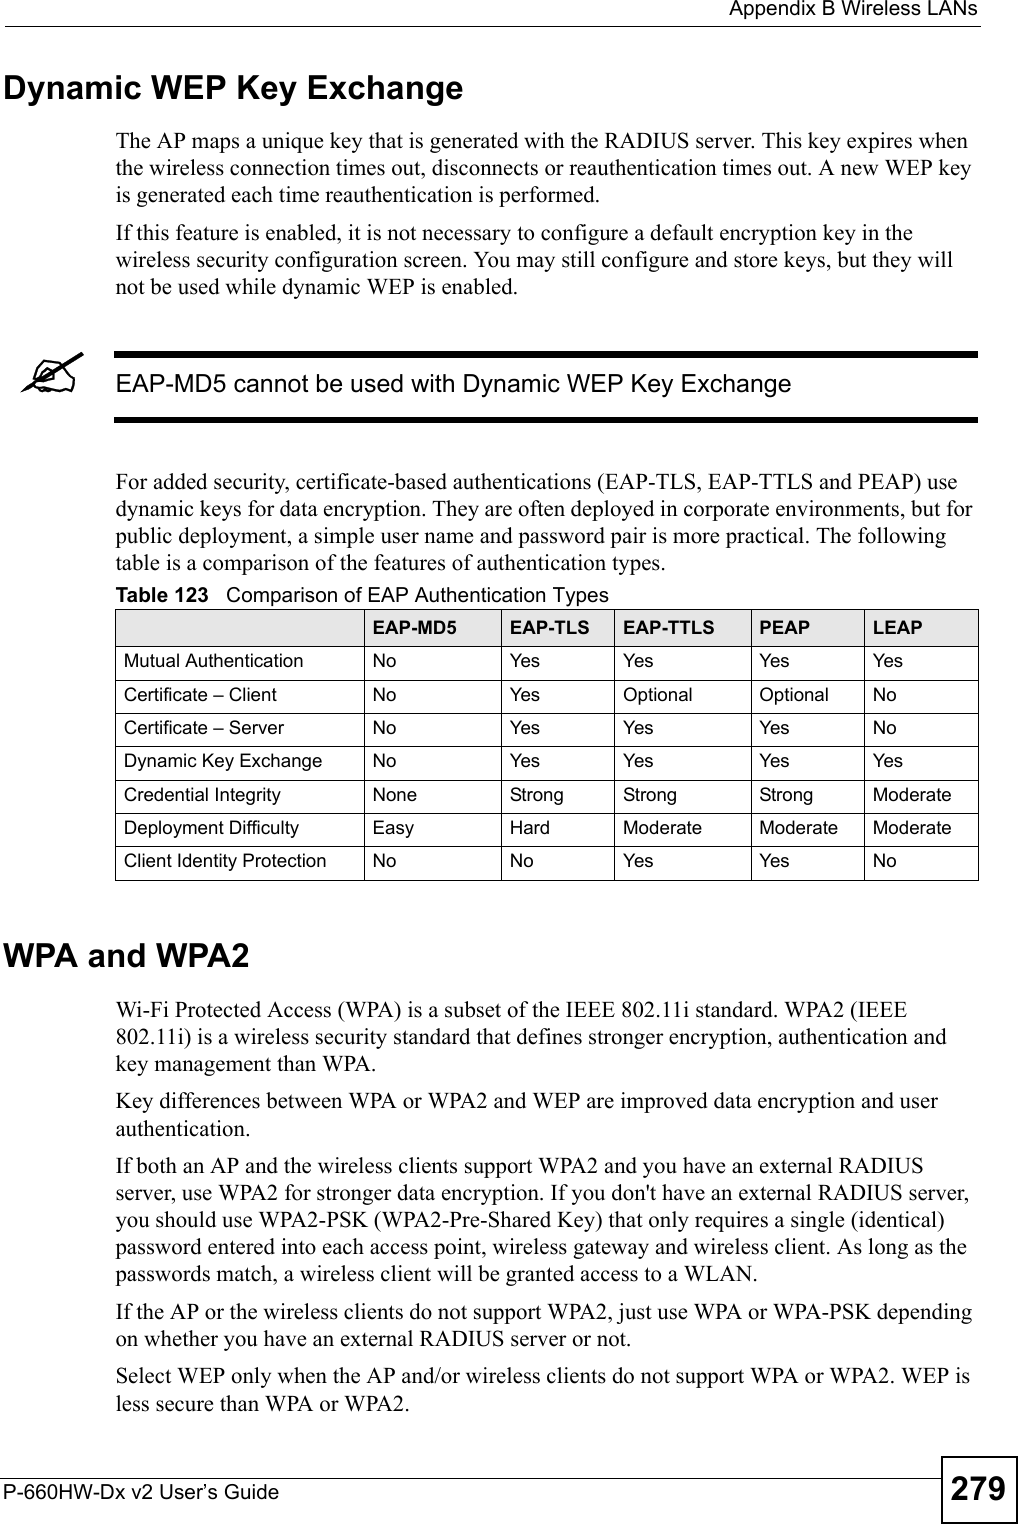  Appendix B Wireless LANsP-660HW-Dx v2 User’s Guide 279Dynamic WEP Key ExchangeThe AP maps a unique key that is generated with the RADIUS server. This key expires when the wireless connection times out, disconnects or reauthentication times out. A new WEP key is generated each time reauthentication is performed.If this feature is enabled, it is not necessary to configure a default encryption key in the wireless security configuration screen. You may still configure and store keys, but they will not be used while dynamic WEP is enabled.&quot;EAP-MD5 cannot be used with Dynamic WEP Key ExchangeFor added security, certificate-based authentications (EAP-TLS, EAP-TTLS and PEAP) use dynamic keys for data encryption. They are often deployed in corporate environments, but for public deployment, a simple user name and password pair is more practical. The following table is a comparison of the features of authentication types.WPA and WPA2Wi-Fi Protected Access (WPA) is a subset of the IEEE 802.11i standard. WPA2 (IEEE 802.11i) is a wireless security standard that defines stronger encryption, authentication and key management than WPA. Key differences between WPA or WPA2 and WEP are improved data encryption and user authentication.If both an AP and the wireless clients support WPA2 and you have an external RADIUS server, use WPA2 for stronger data encryption. If you don&apos;t have an external RADIUS server, you should use WPA2-PSK (WPA2-Pre-Shared Key) that only requires a single (identical) password entered into each access point, wireless gateway and wireless client. As long as the passwords match, a wireless client will be granted access to a WLAN. If the AP or the wireless clients do not support WPA2, just use WPA or WPA-PSK depending on whether you have an external RADIUS server or not.Select WEP only when the AP and/or wireless clients do not support WPA or WPA2. WEP is less secure than WPA or WPA2.Table 123   Comparison of EAP Authentication TypesEAP-MD5 EAP-TLS EAP-TTLS PEAP LEAPMutual Authentication No Yes Yes Yes YesCertificate – Client No Yes Optional Optional NoCertificate – Server No Yes Yes Yes NoDynamic Key Exchange No Yes Yes Yes YesCredential Integrity None Strong Strong Strong ModerateDeployment Difficulty Easy Hard Moderate Moderate ModerateClient Identity Protection No No Yes Yes No